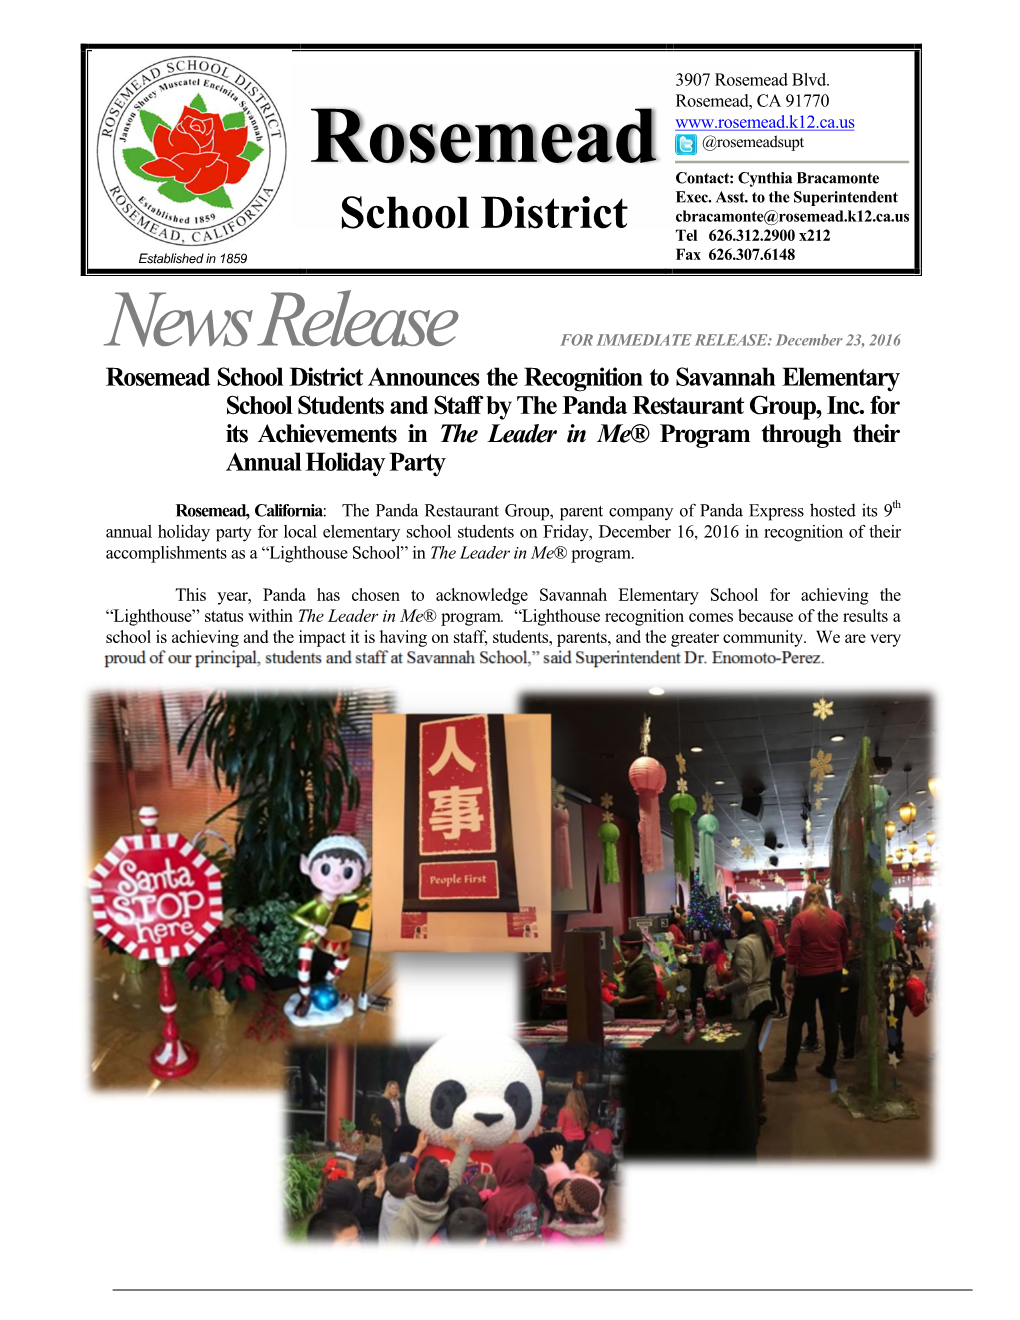 Rosemead SD Announces the Recognition to Savannah Students